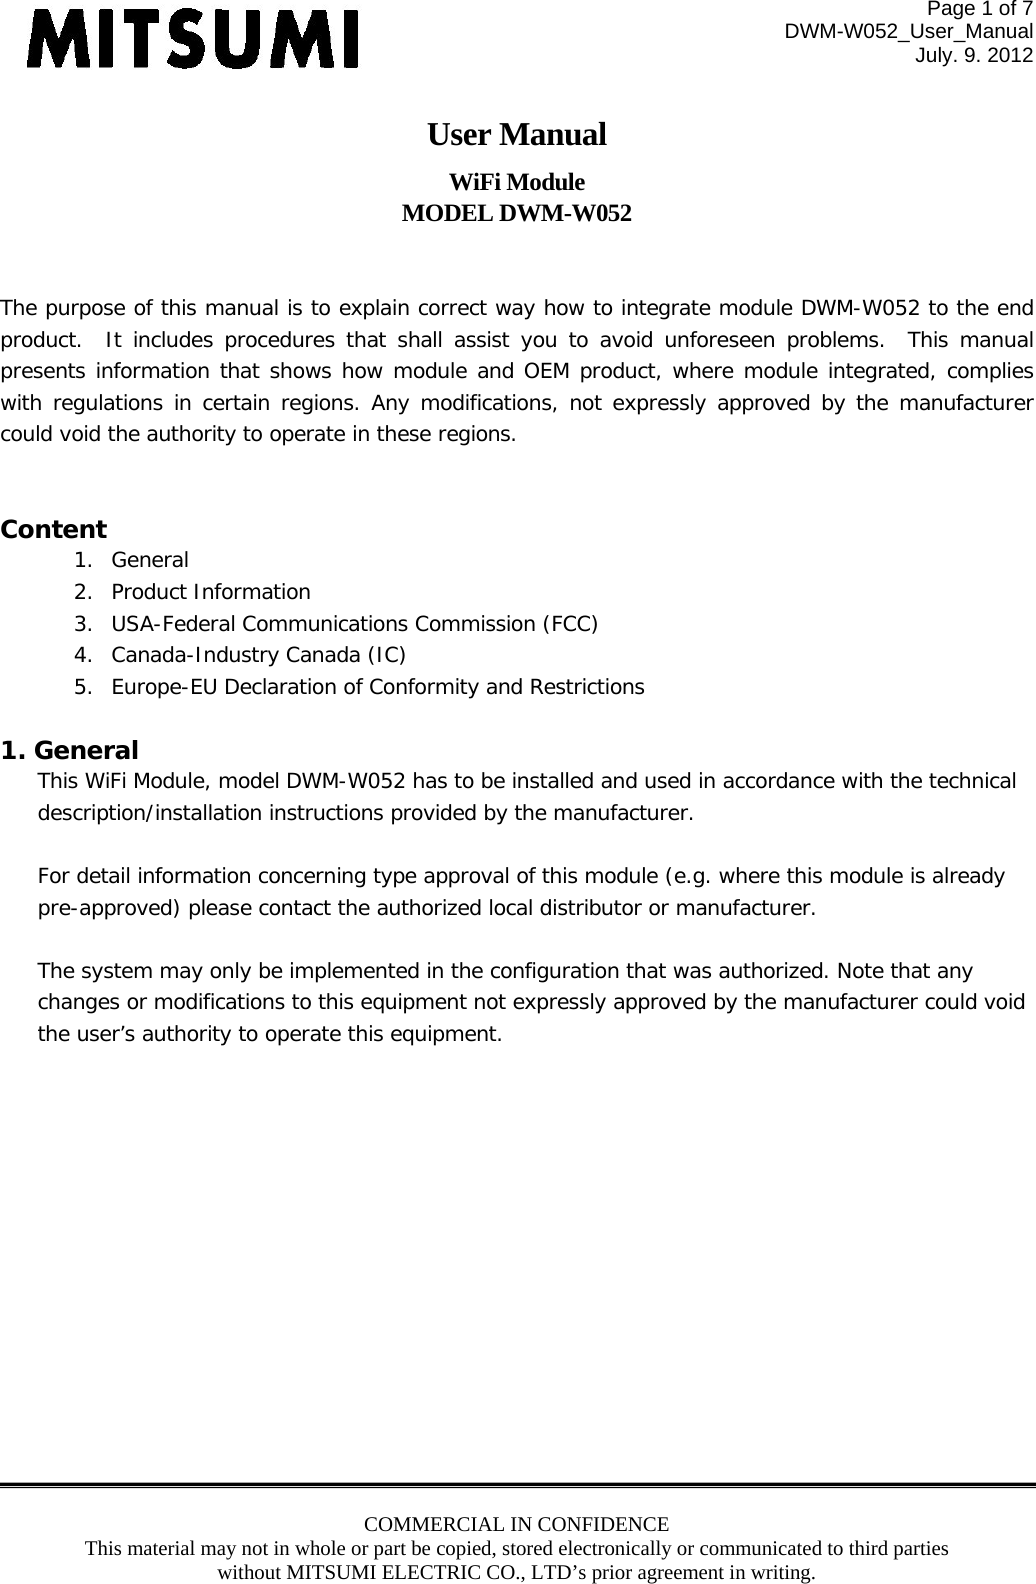 Page 1 of 7 DWM-W052_User_Manual July. 9. 2012 COMMERCIAL IN CONFIDENCE This material may not in whole or part be copied, stored electronically or communicated to third parties without MITSUMI ELECTRIC CO., LTD’s prior agreement in writing.  User Manual WiFi Module MODEL DWM-W052   The purpose of this manual is to explain correct way how to integrate module DWM-W052 to the end product.  It includes procedures that shall assist you to avoid unforeseen problems. This manual presents information that shows how module and OEM product, where module integrated, complies with regulations in certain regions. Any modifications, not expressly approved by the manufacturer could void the authority to operate in these regions.  Content 1. General 2. Product Information 3. USA-Federal Communications Commission (FCC) 4. Canada-Industry Canada (IC) 5. Europe-EU Declaration of Conformity and Restrictions  1. General This WiFi Module, model DWM-W052 has to be installed and used in accordance with the technical description/installation instructions provided by the manufacturer.  For detail information concerning type approval of this module (e.g. where this module is already pre-approved) please contact the authorized local distributor or manufacturer.  The system may only be implemented in the configuration that was authorized. Note that any changes or modifications to this equipment not expressly approved by the manufacturer could void the user’s authority to operate this equipment.  